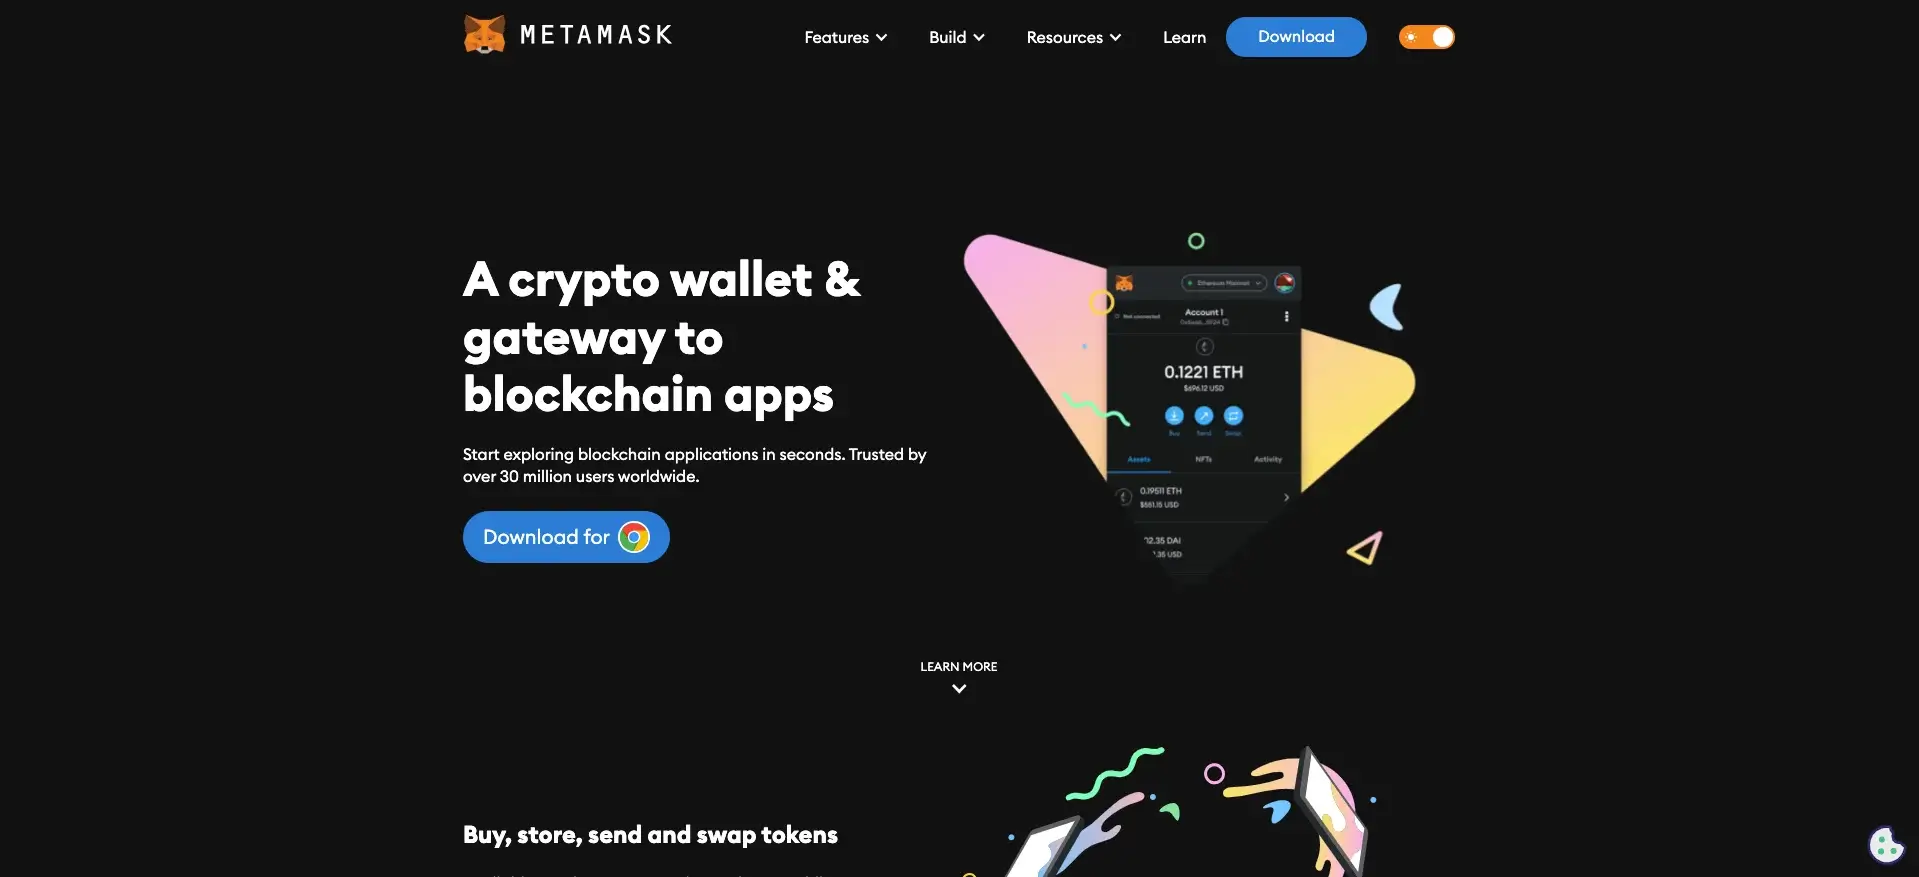 Step 1: Access MetaMask or Install the Mobile App